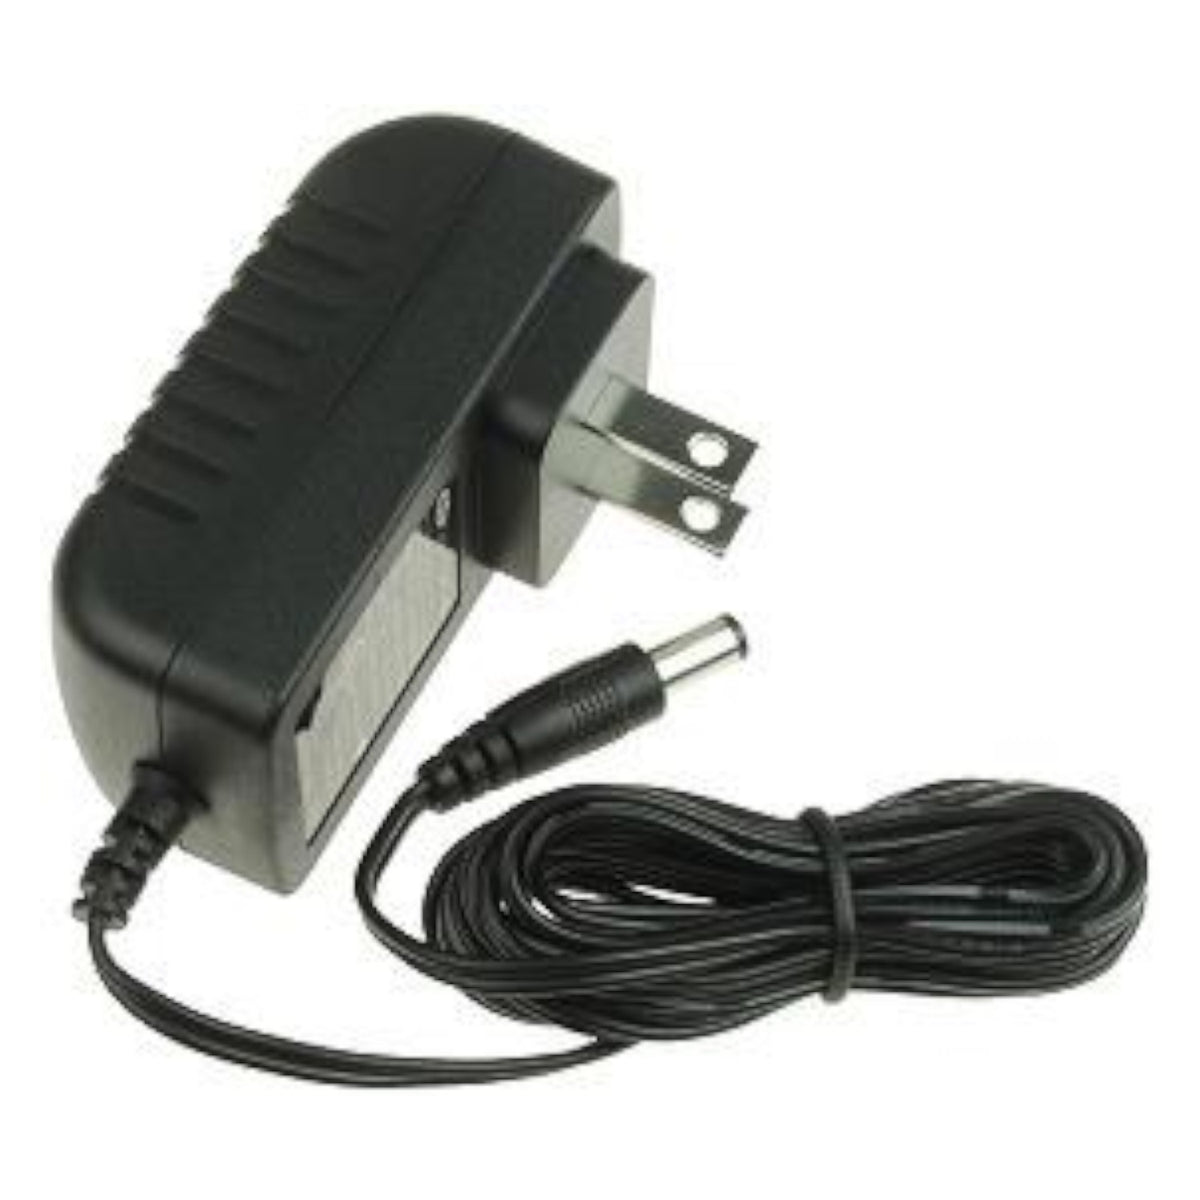 Pro Plus Charger (17-144-4)